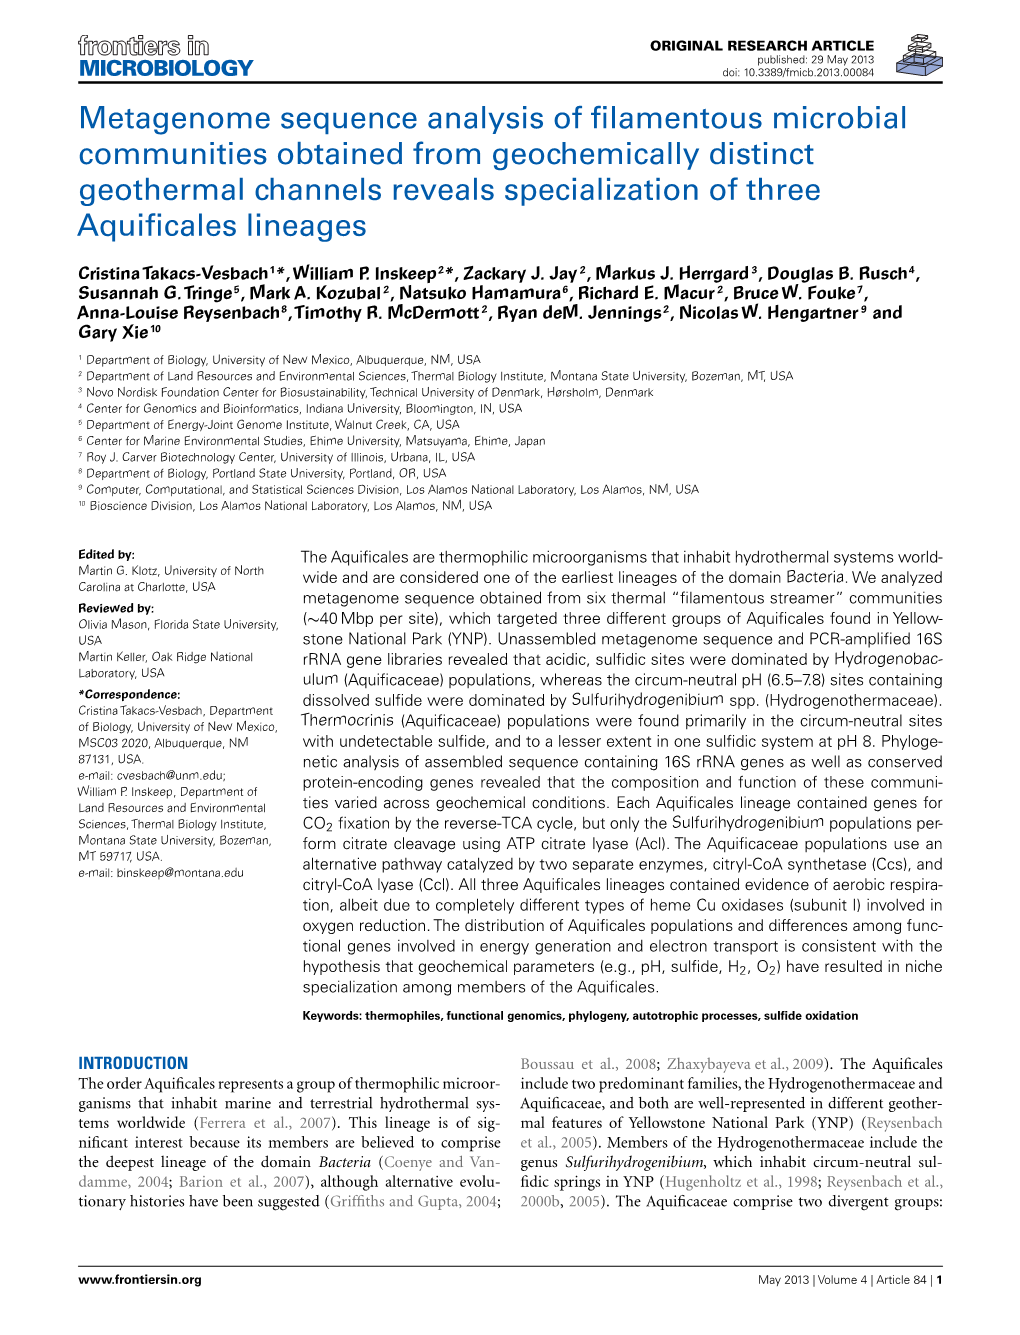 Metagenome Sequence Analysis of Filamentous Microbial Communities Obtained from Geochemically Distinct Geothermal Channels Revea